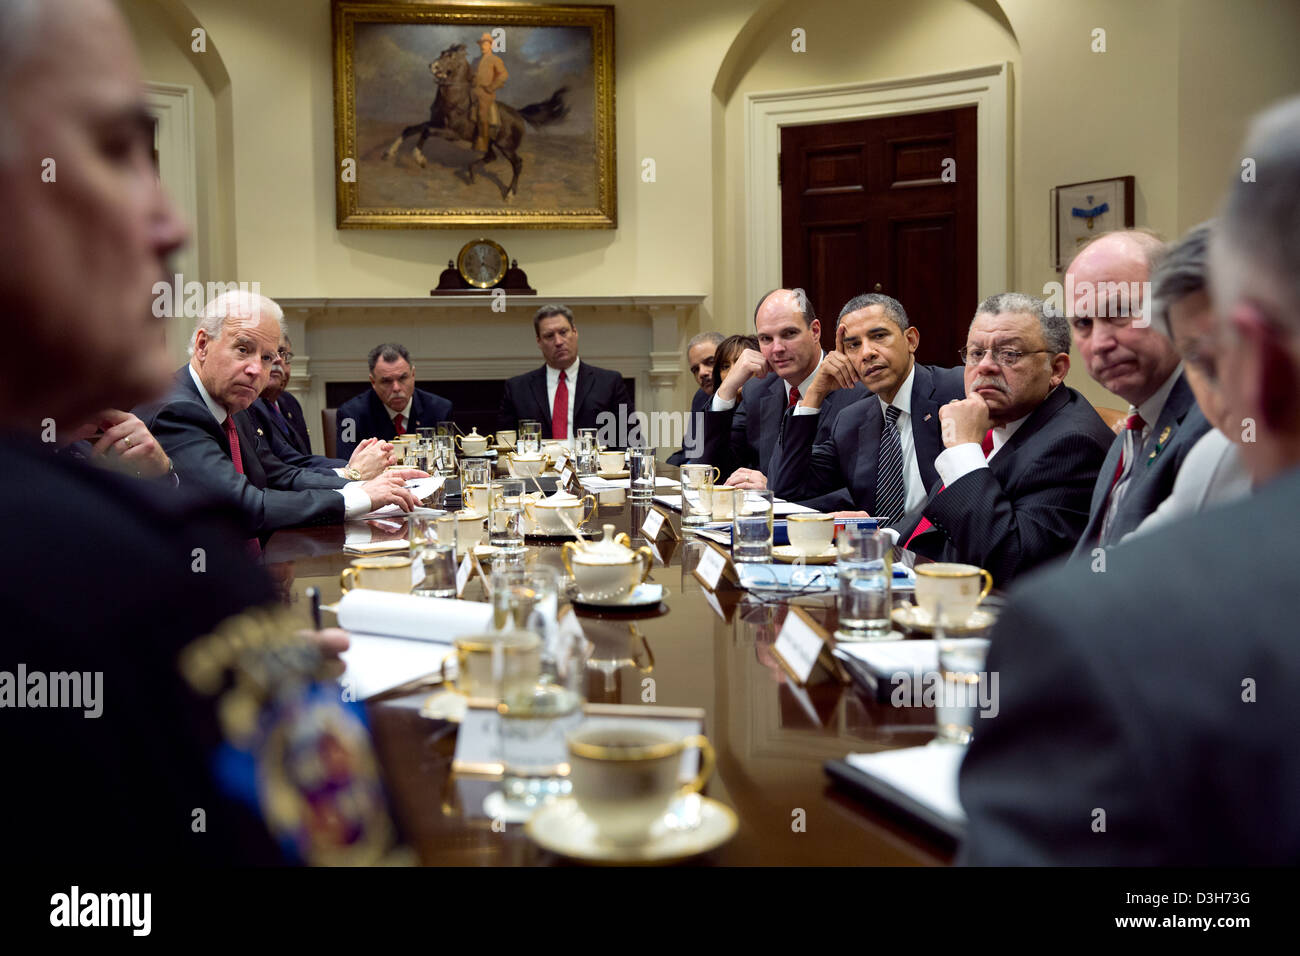 US President Barack Obama and Vice President Joe Biden meet with law enforcement officials to discuss policies aimed at reducing gun violence in communities across America in the Roosevelt Room of the White House January 28, 2013 in Washington, DC. Stock Photo